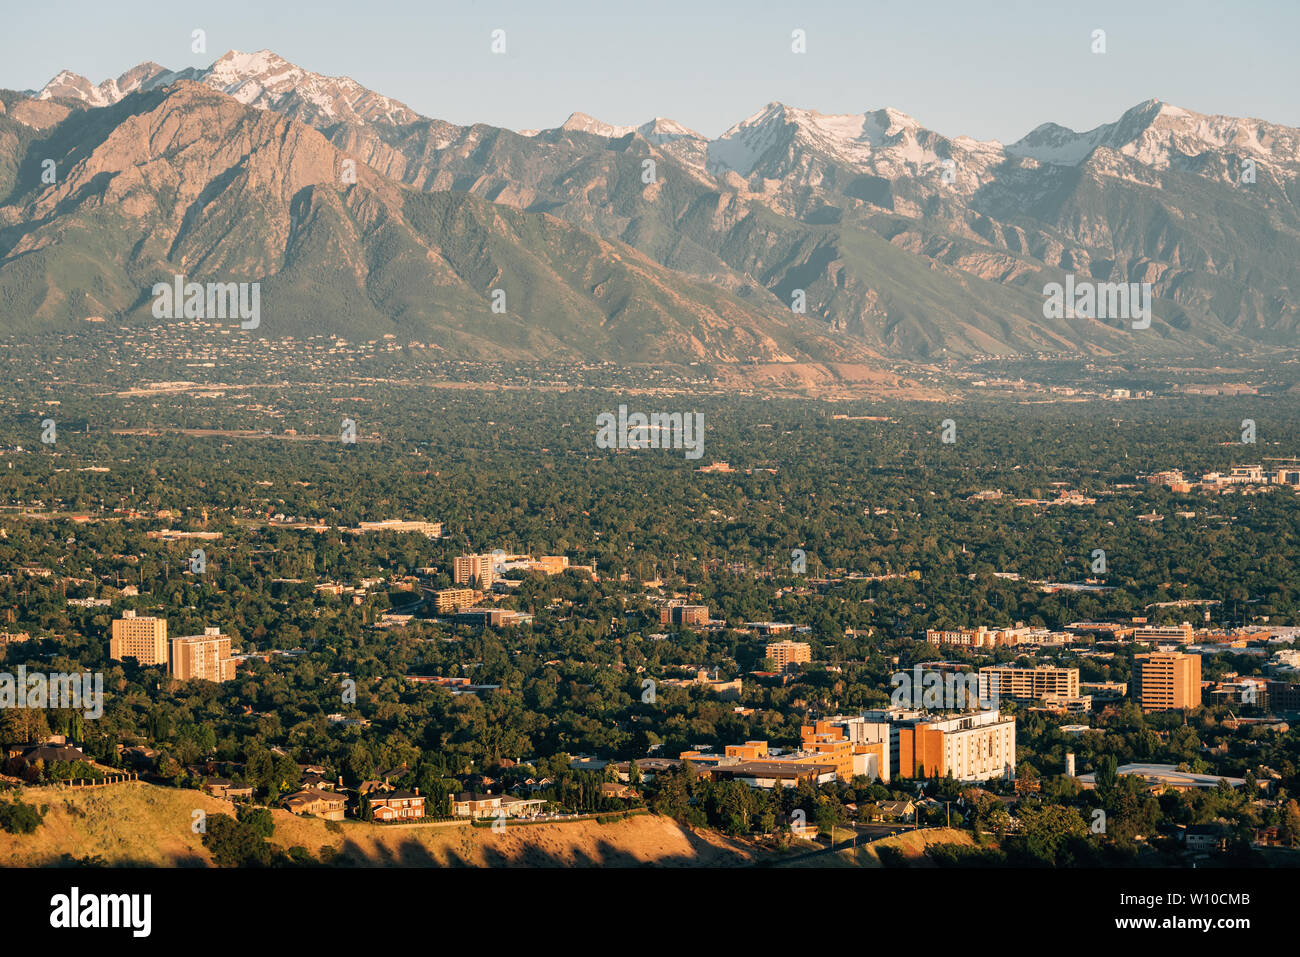 View of the Wasatch Mountains from Ensign Peak, in Salt Lake City, Utah Stock Photo